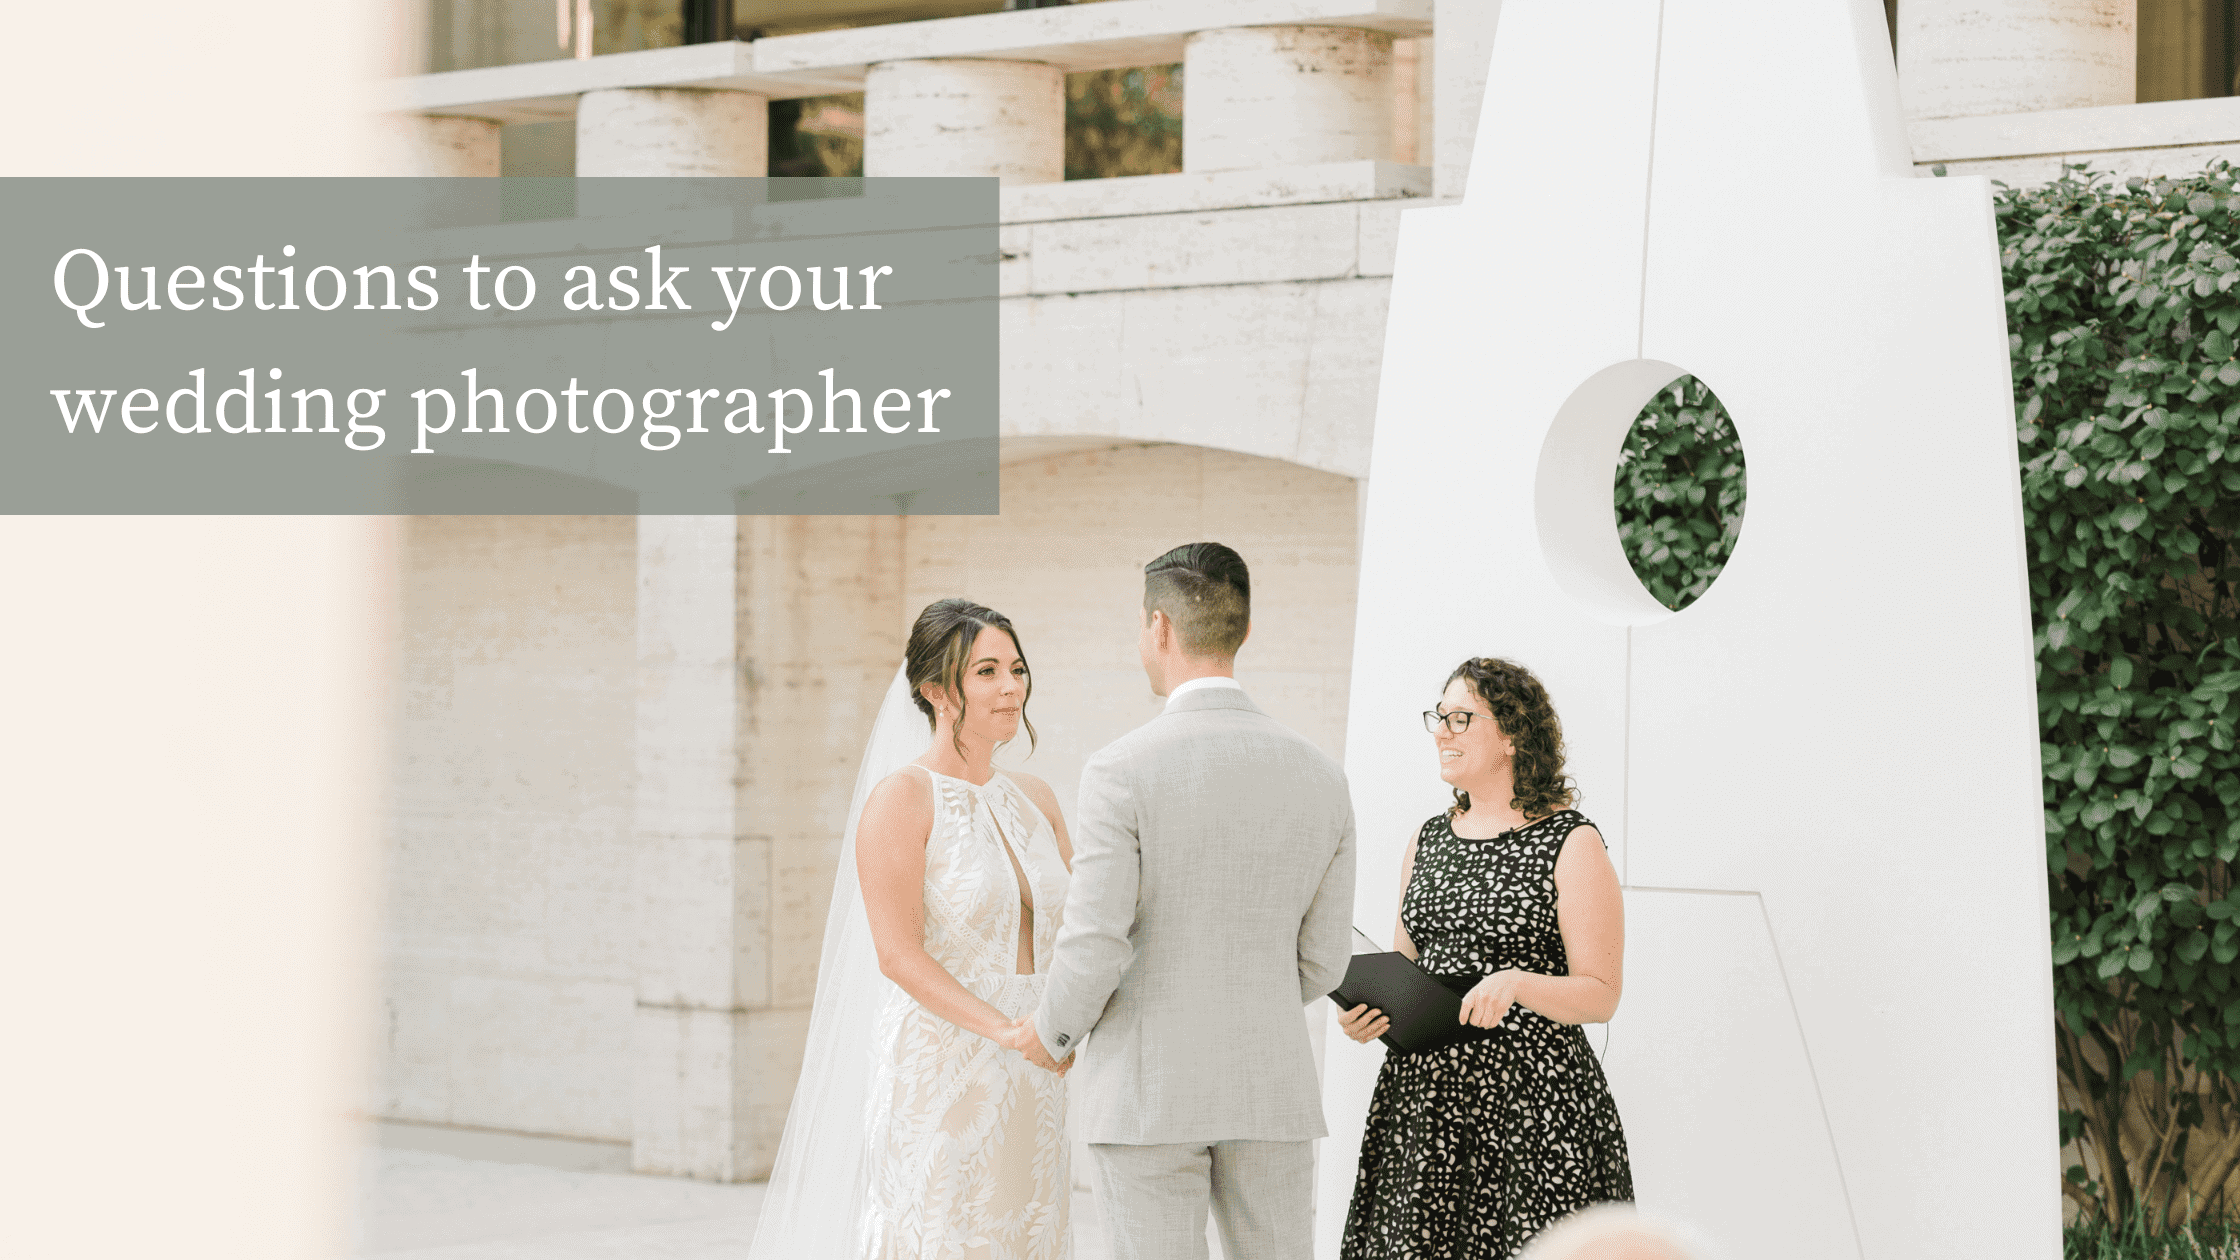 Surrounded by sunlight pouring in the beautiful white courtyard of the Kreeger Museum in Washington DC, a bride holds her partners hand and says her vows to him. The text overlay on the left reads: "Questions to ask your wedding photographer"